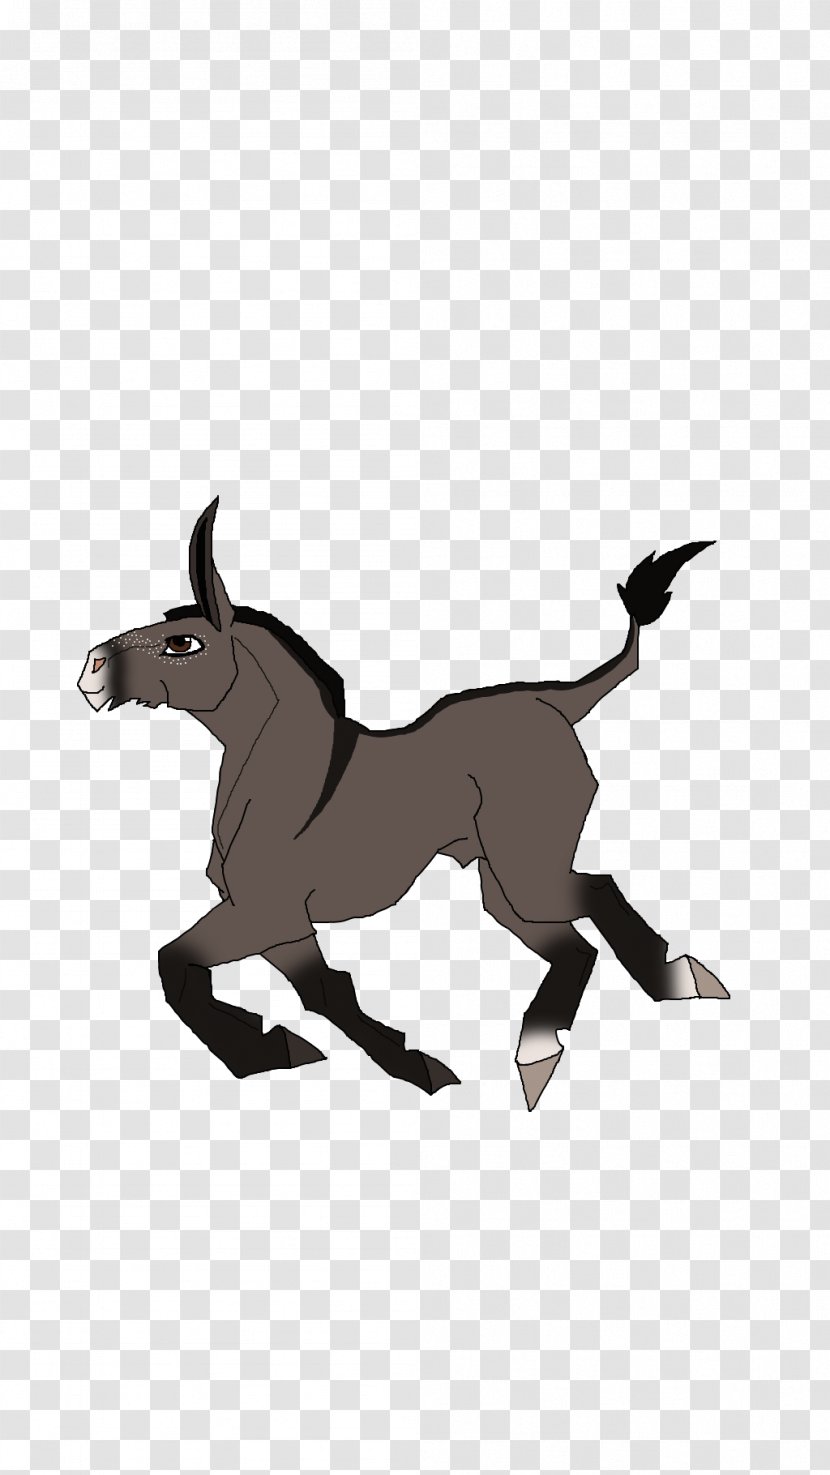 Mule Foal Stallion Donkey Mustang - Silhouette Transparent PNG